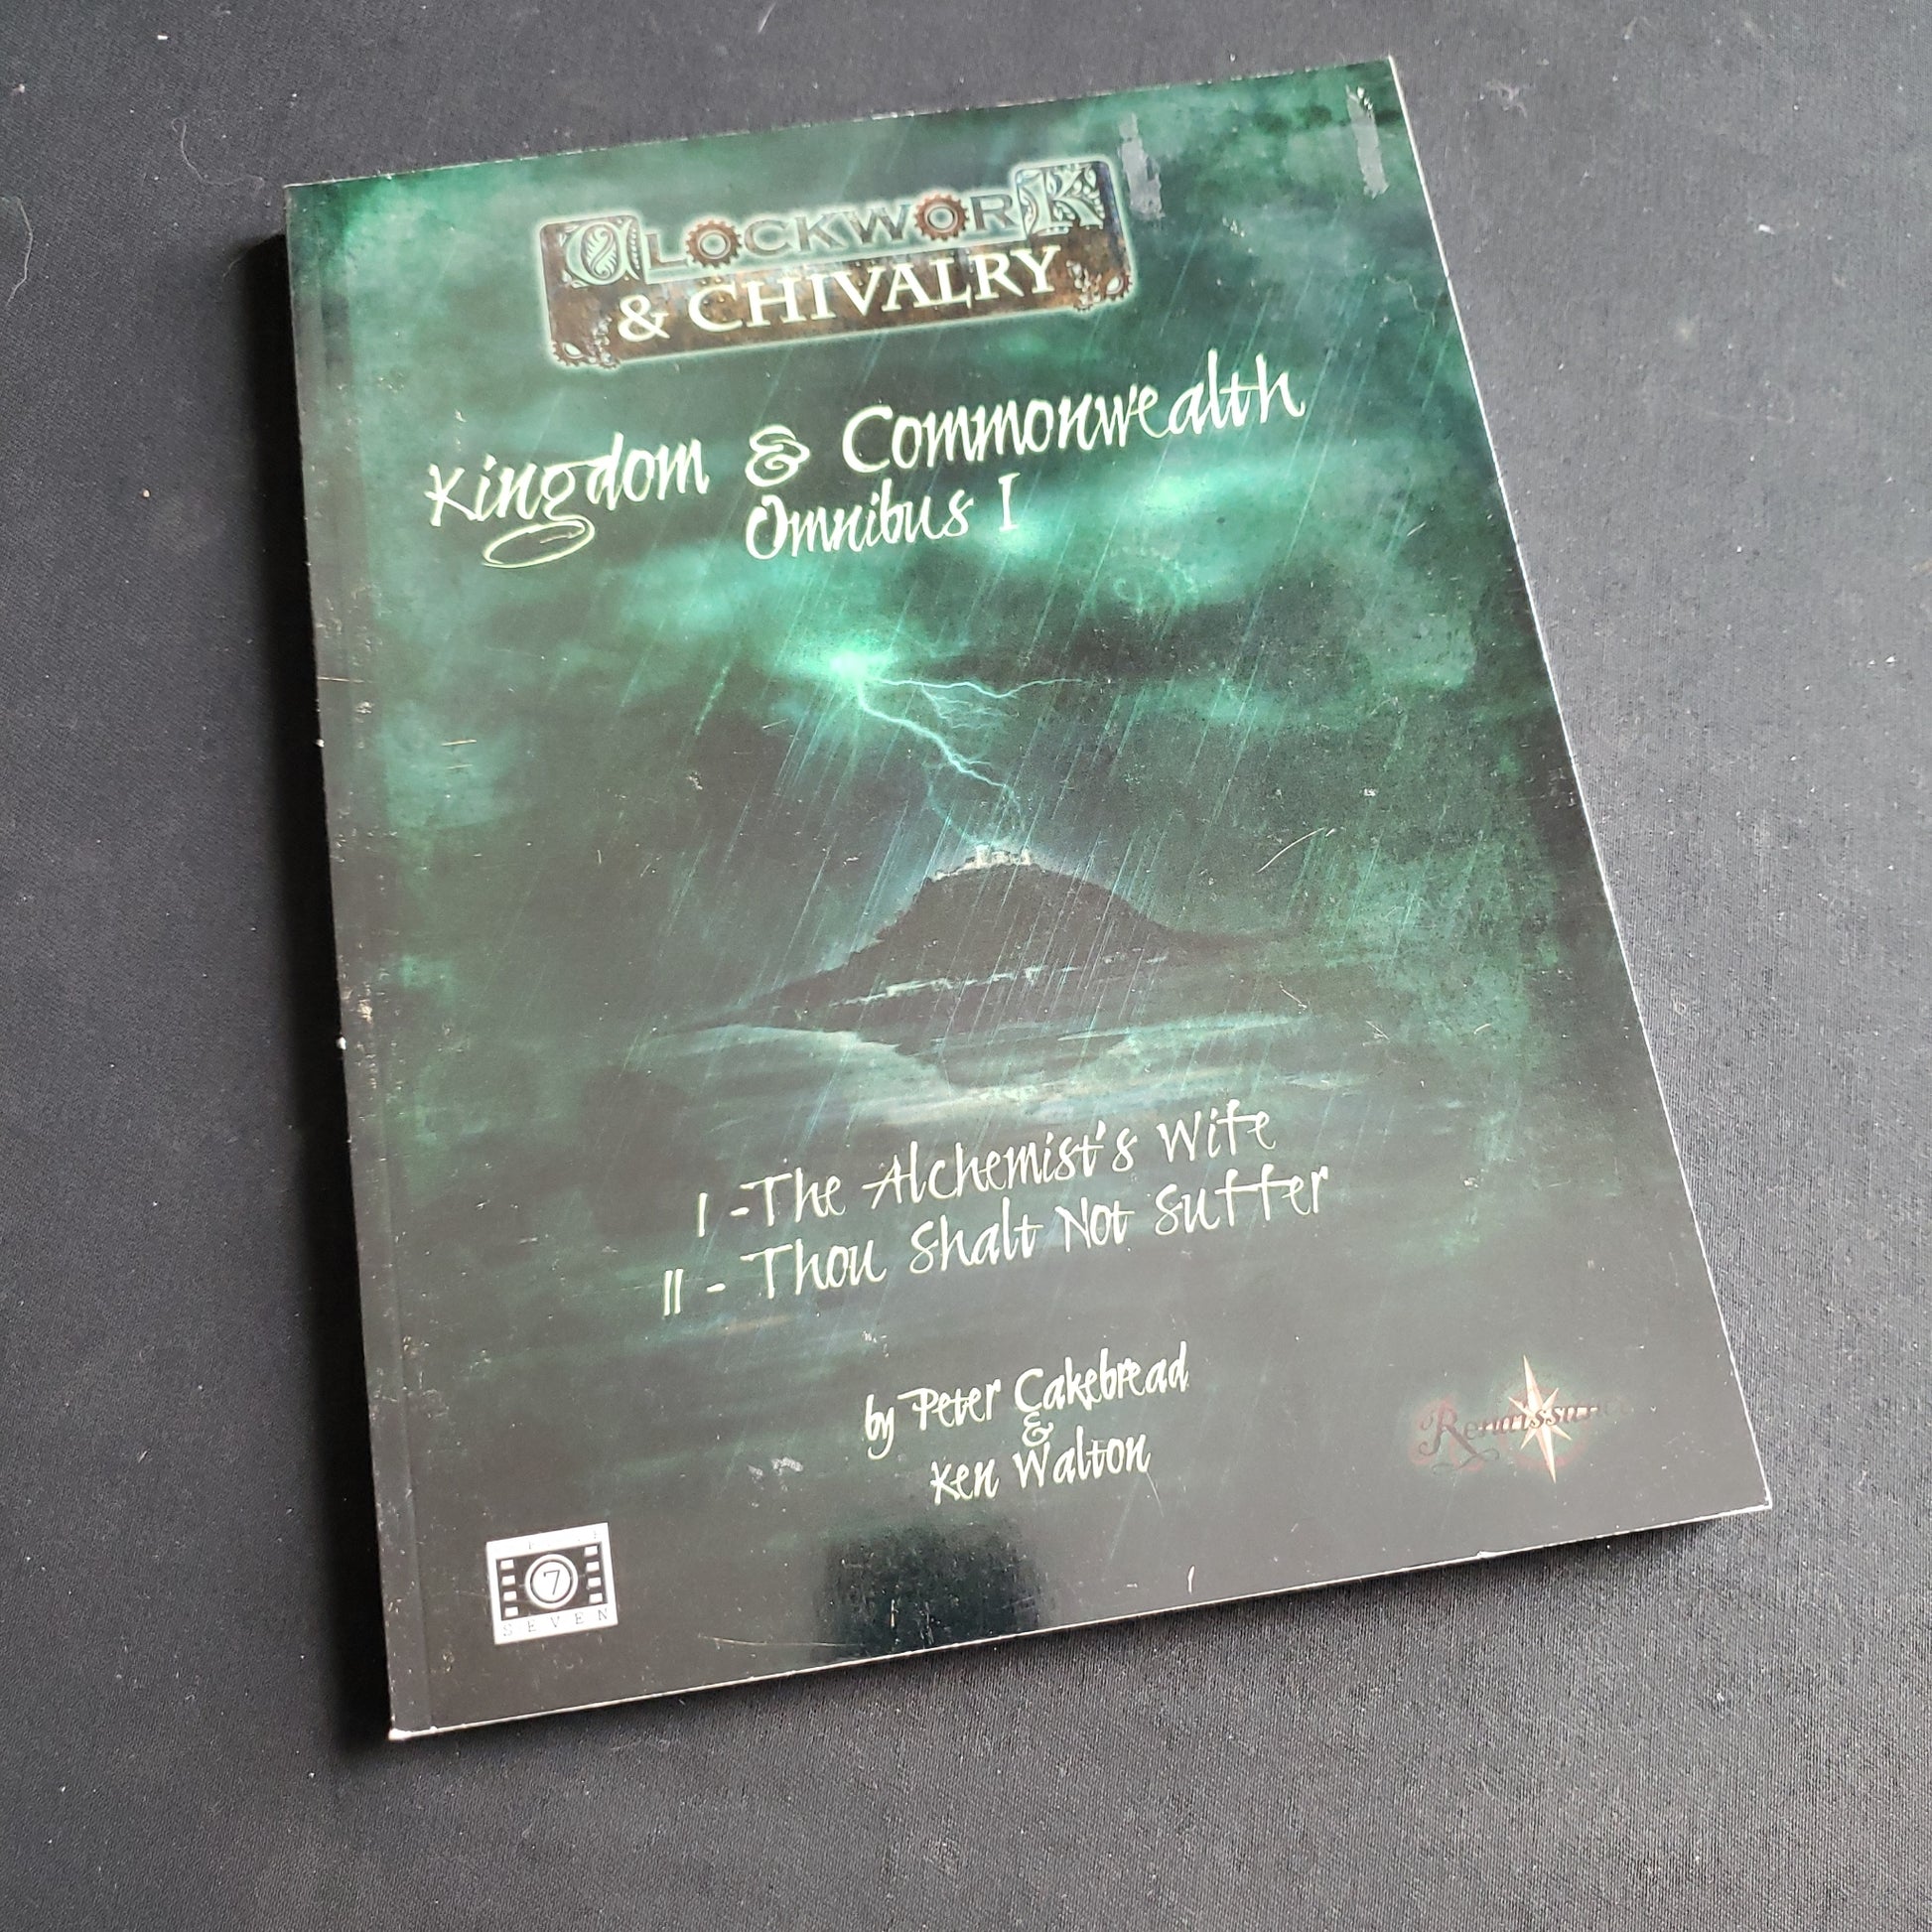 Image shows the front cover of the Kingdom and Commonwealth Omnibus I book for the Clockwork & Chivalry roleplaying game